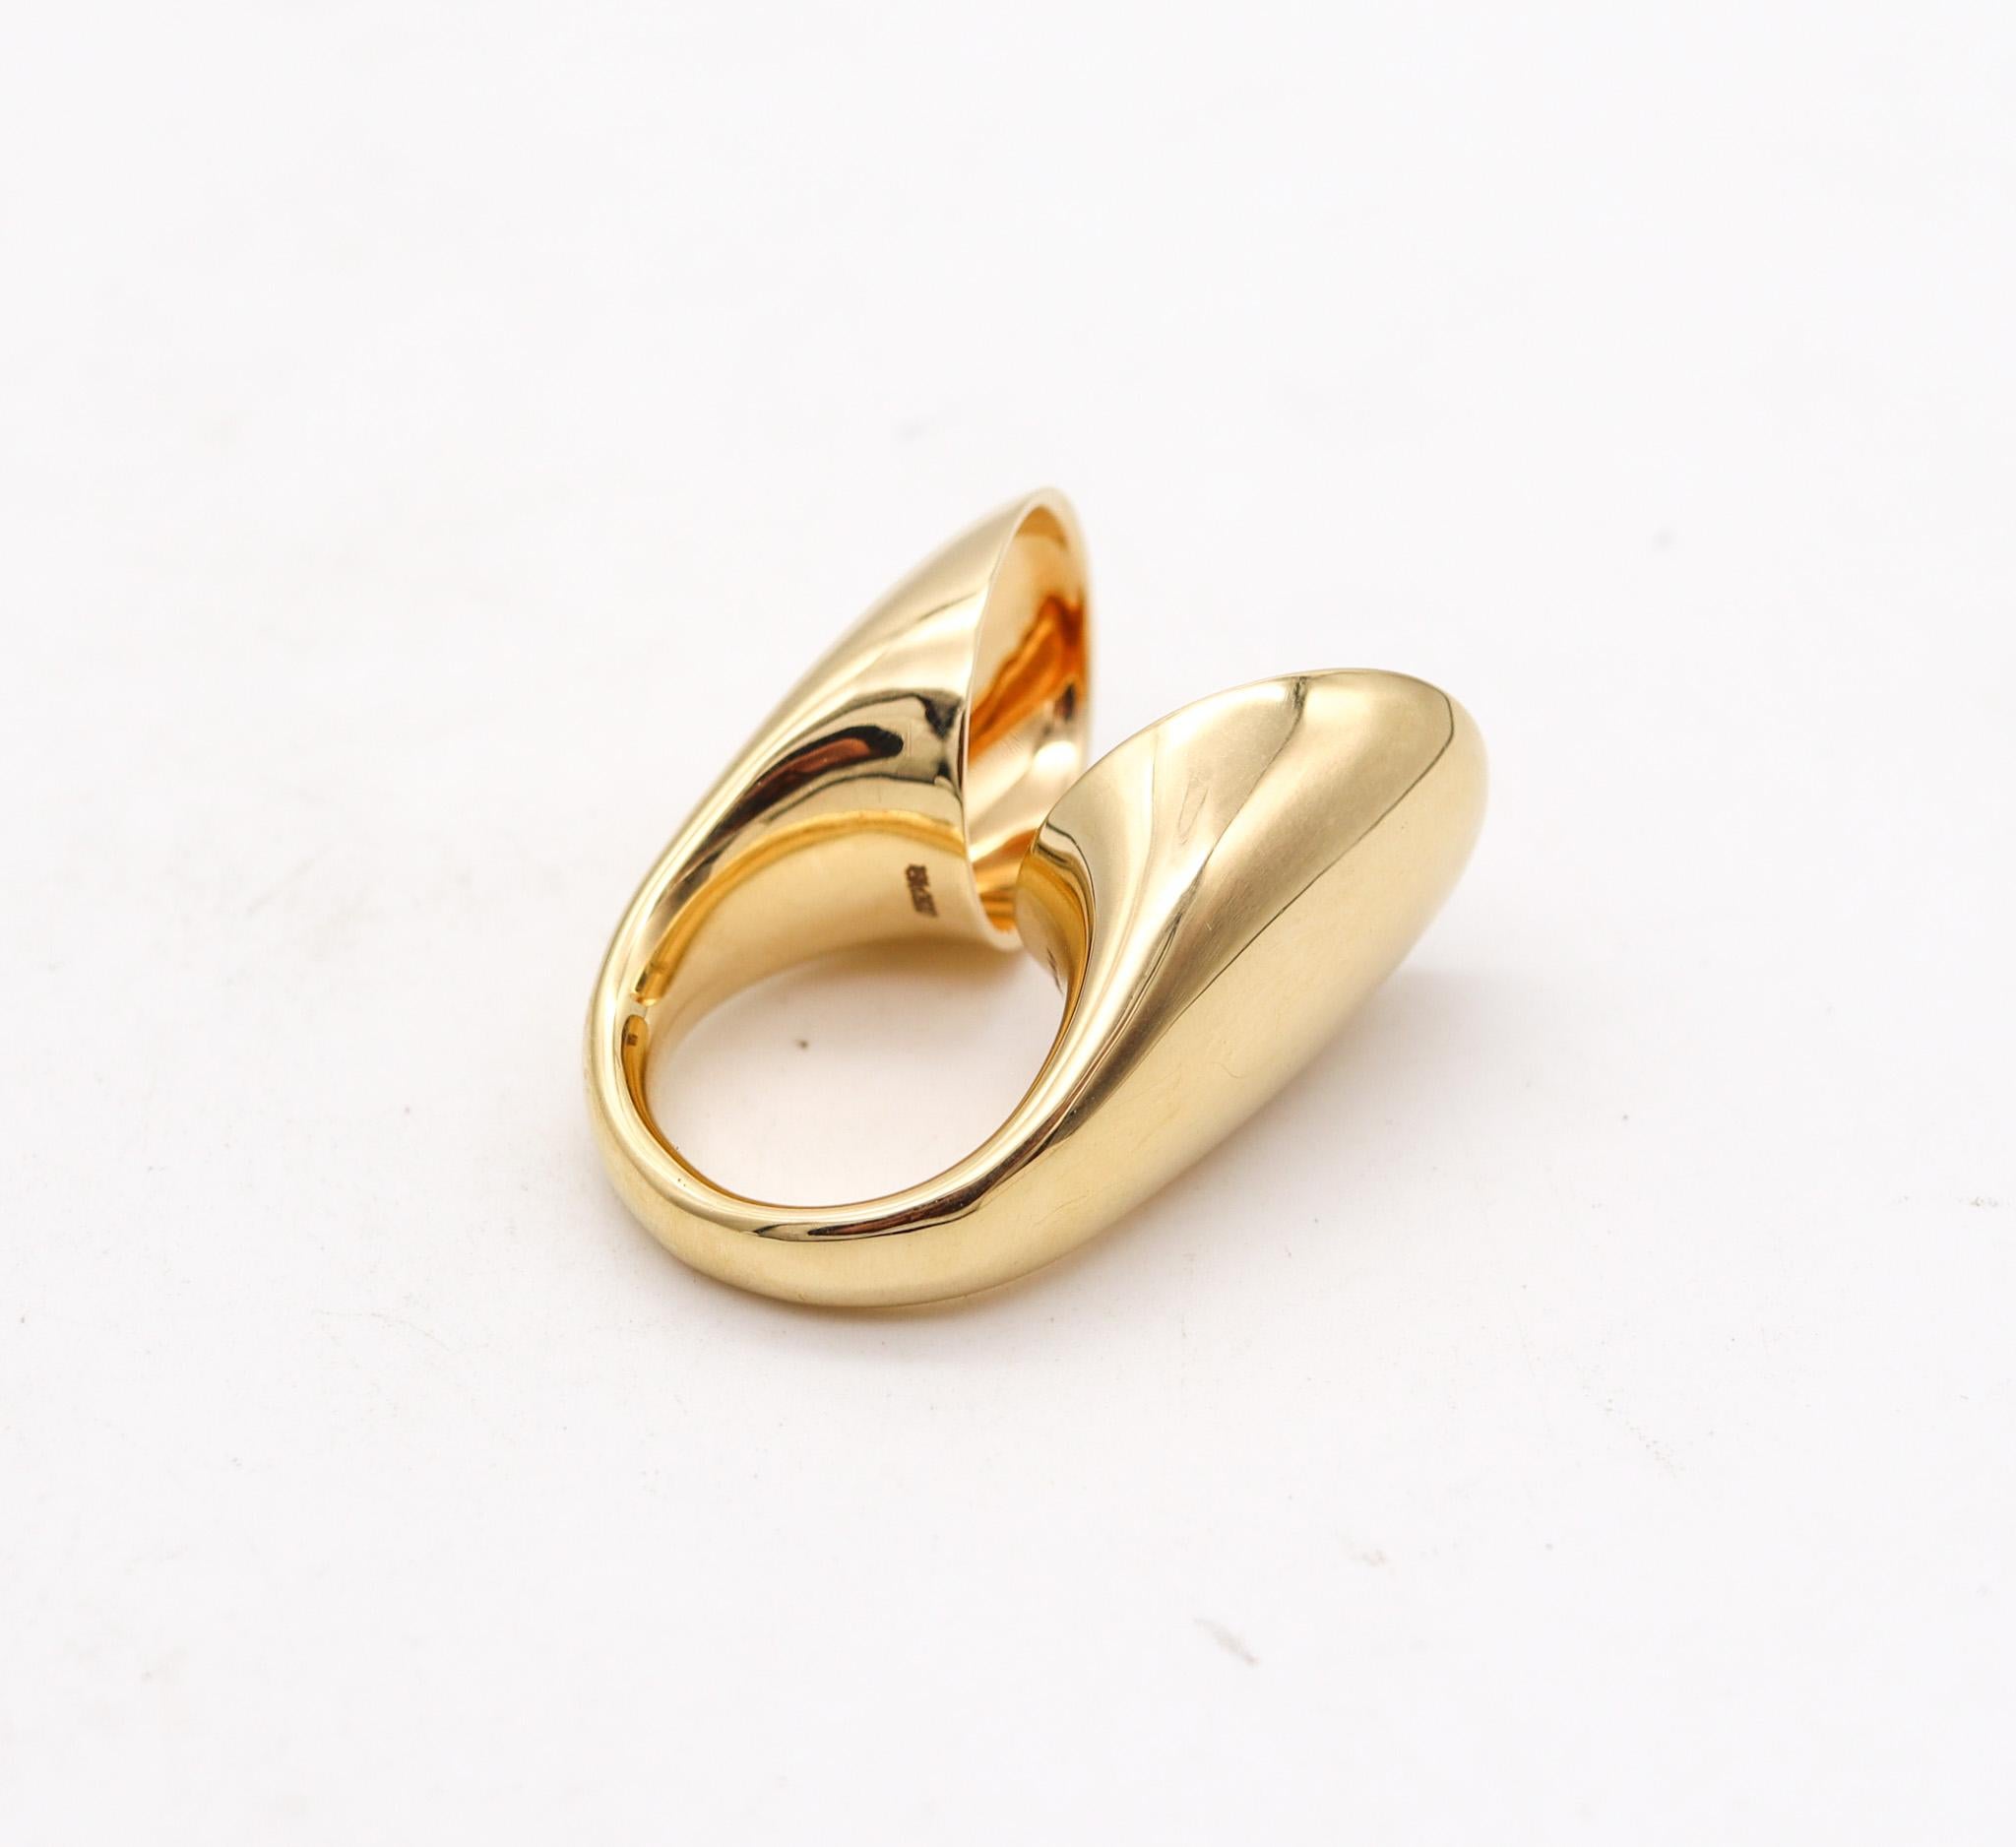 Sculptural cocktail ring designed by VRAM.

Fantastic sculptural ring, created at the VRAM Studio in Los Angeles, California. This contemporary ring is called ECHO and was crafted with an aerodynamical shape and generous scale in solid yellow gold